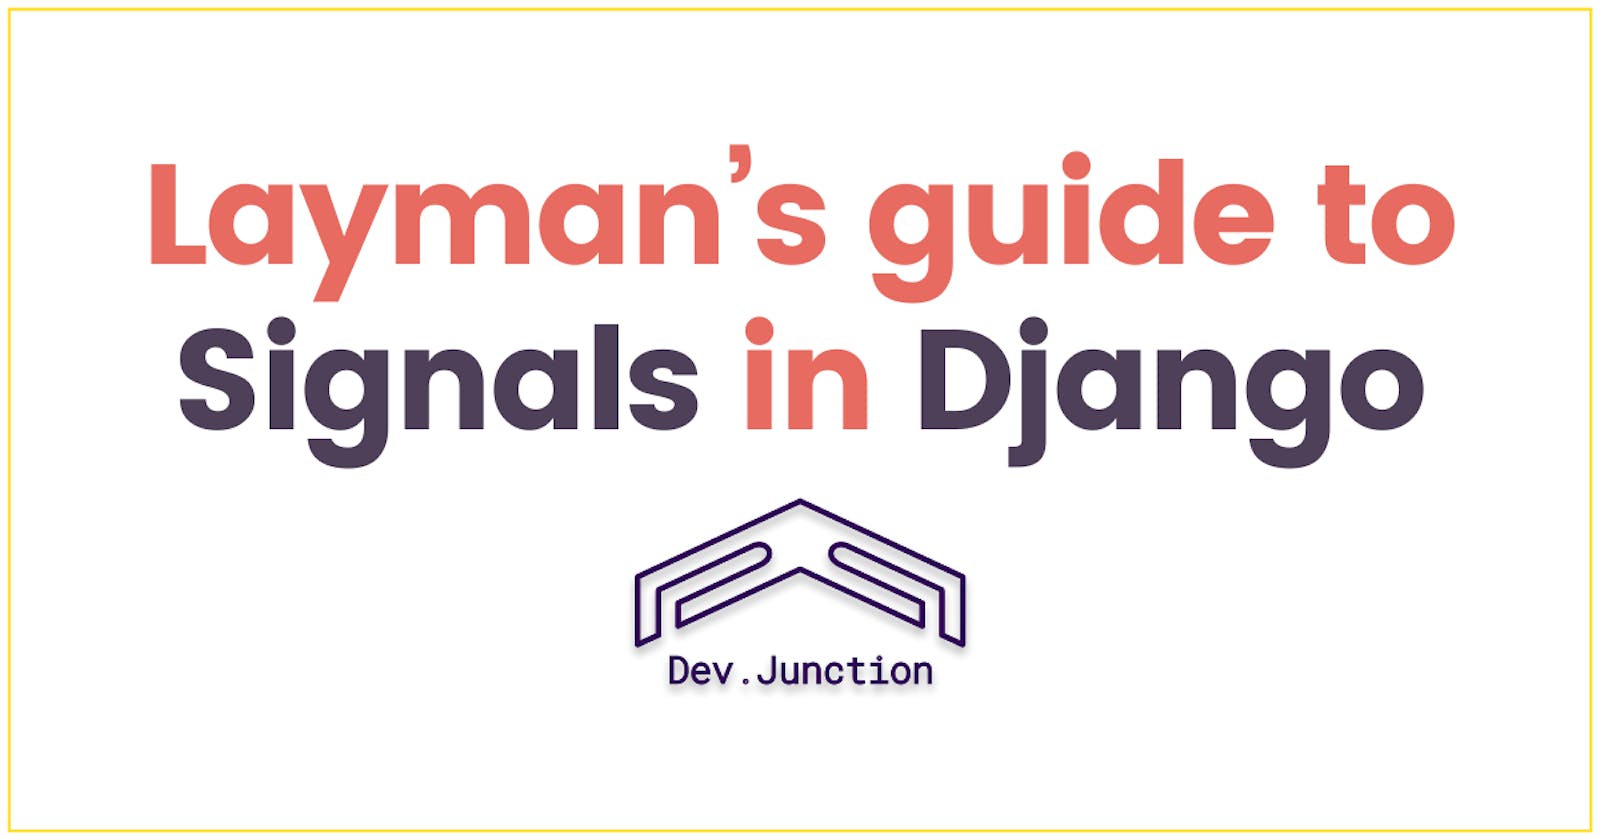 Layman’s guide to Signals in Django